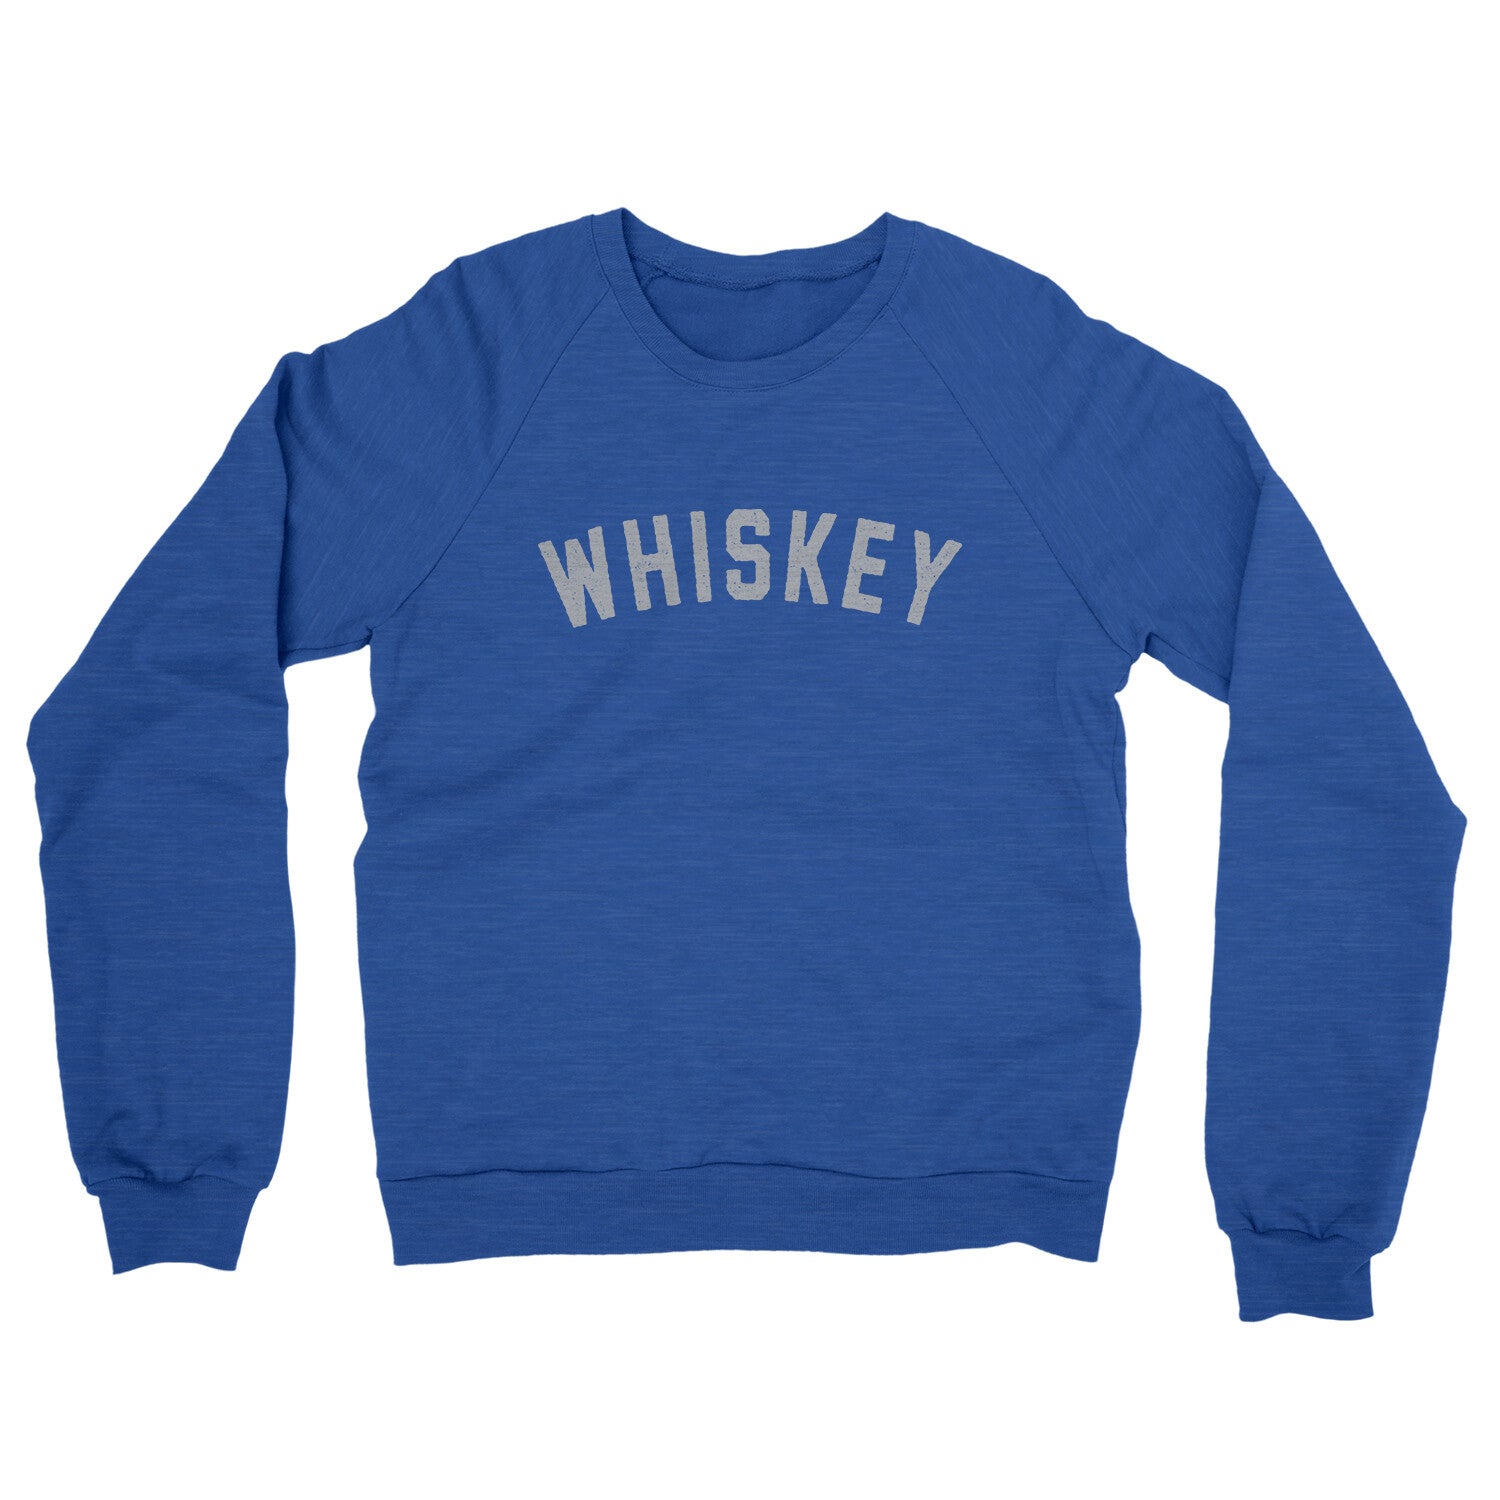 Whiskey in Heather Royal Color